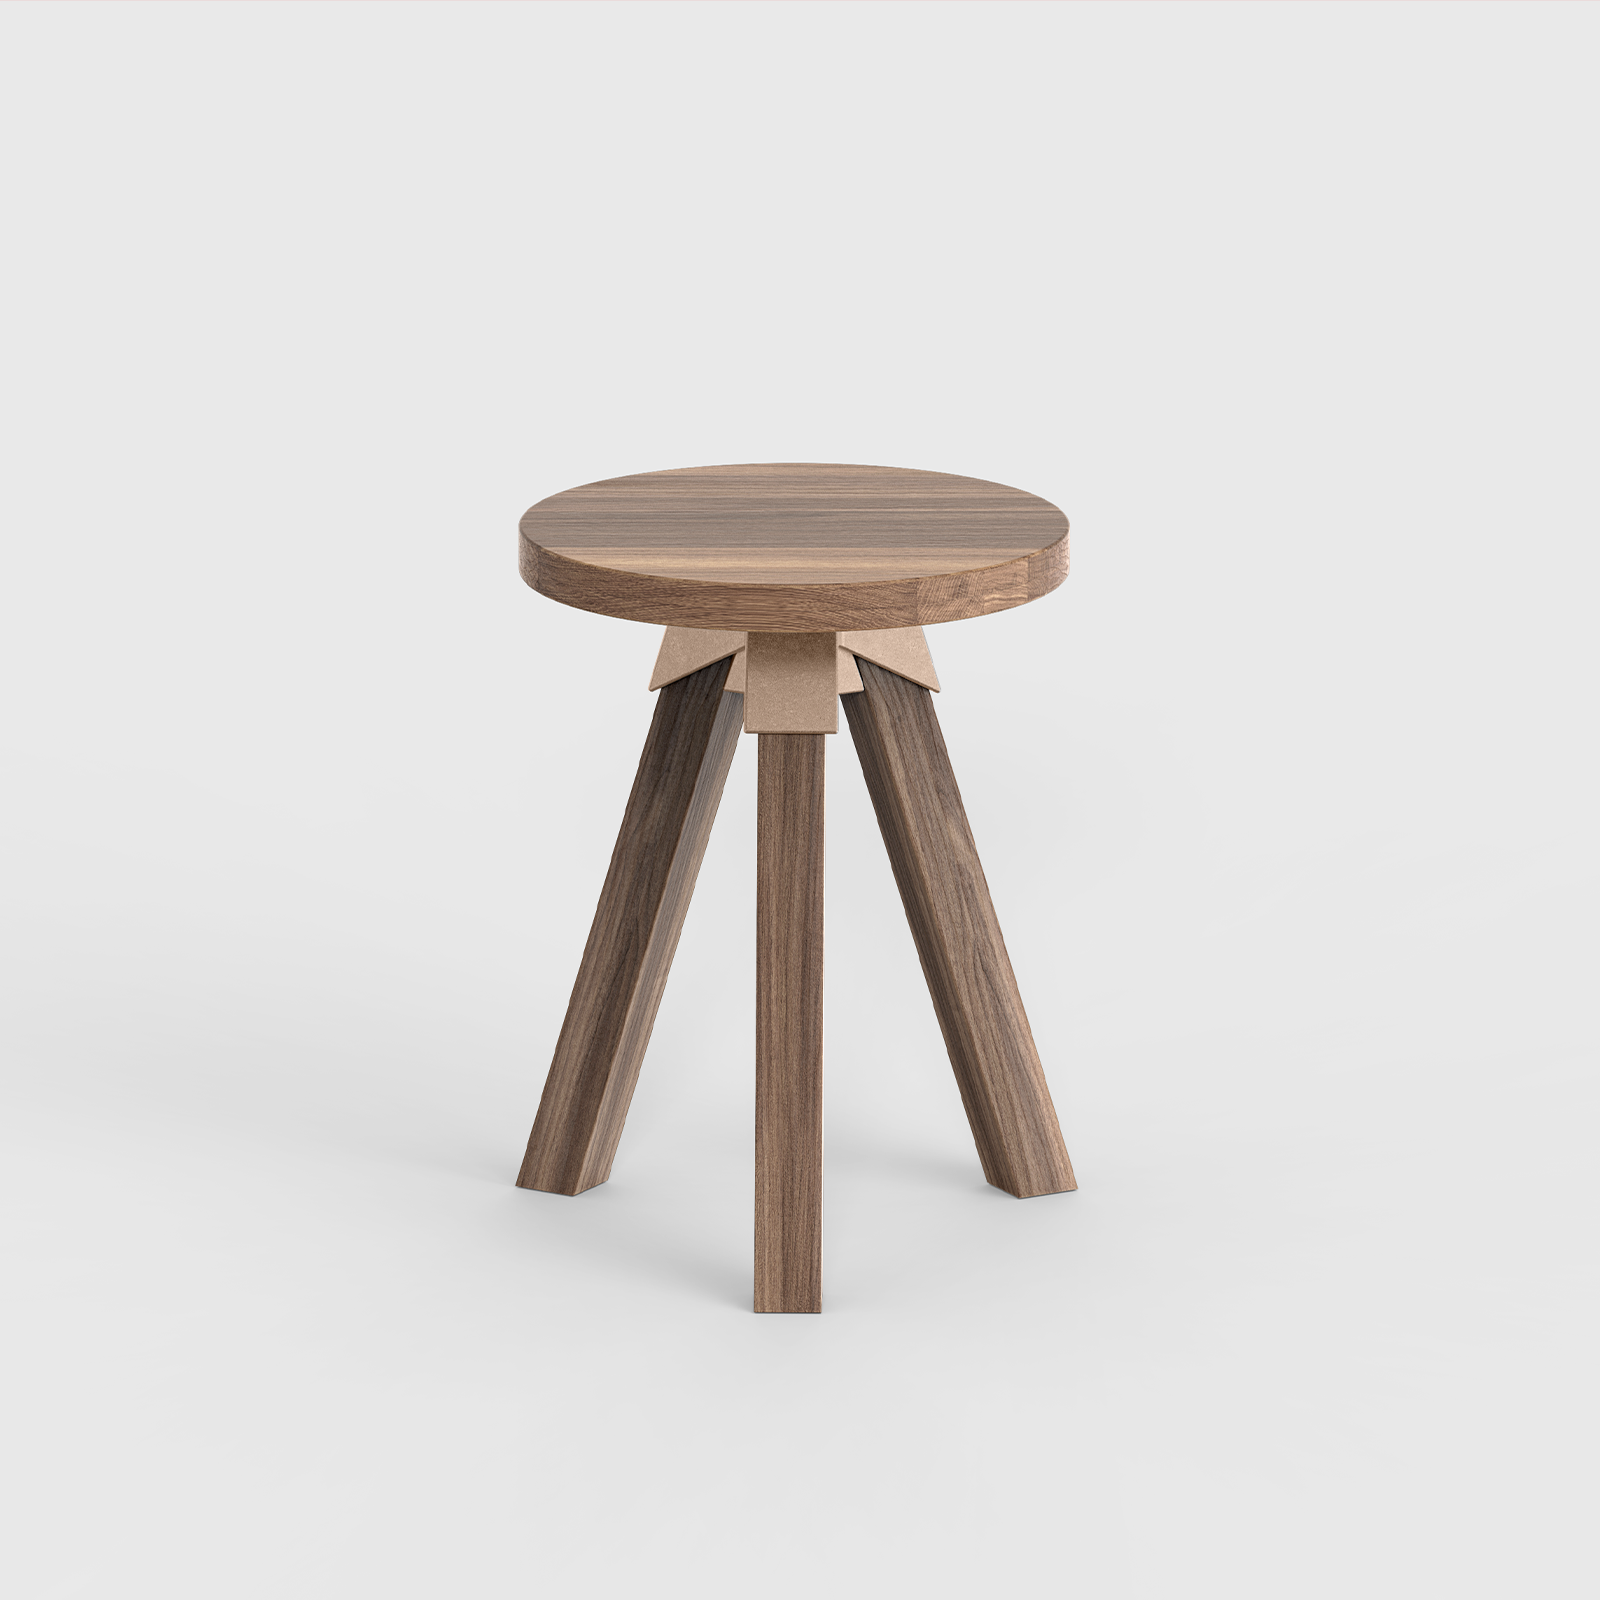 A-joint stool in solid American Walnut with cast bronze A-joint